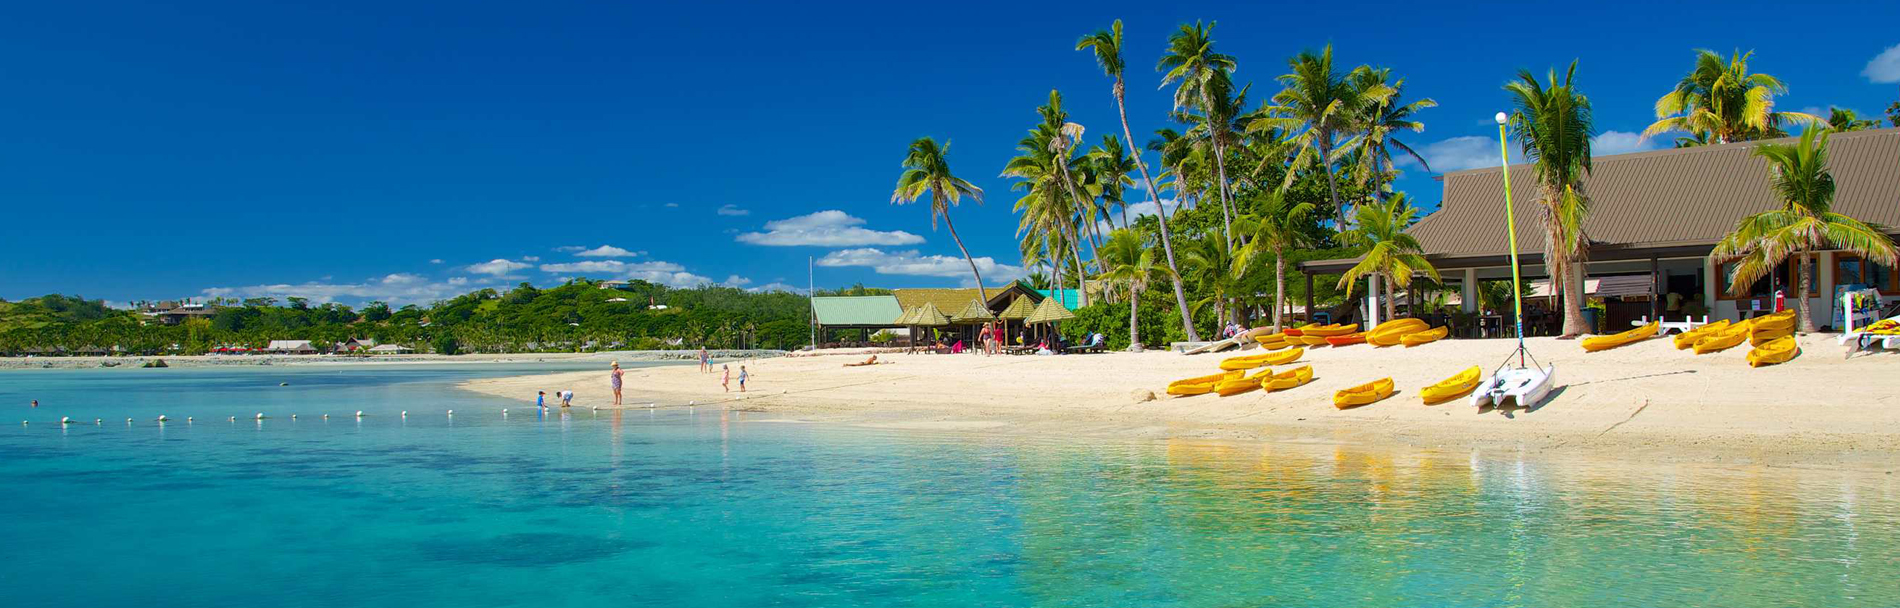 Fiji Island Tour Packages